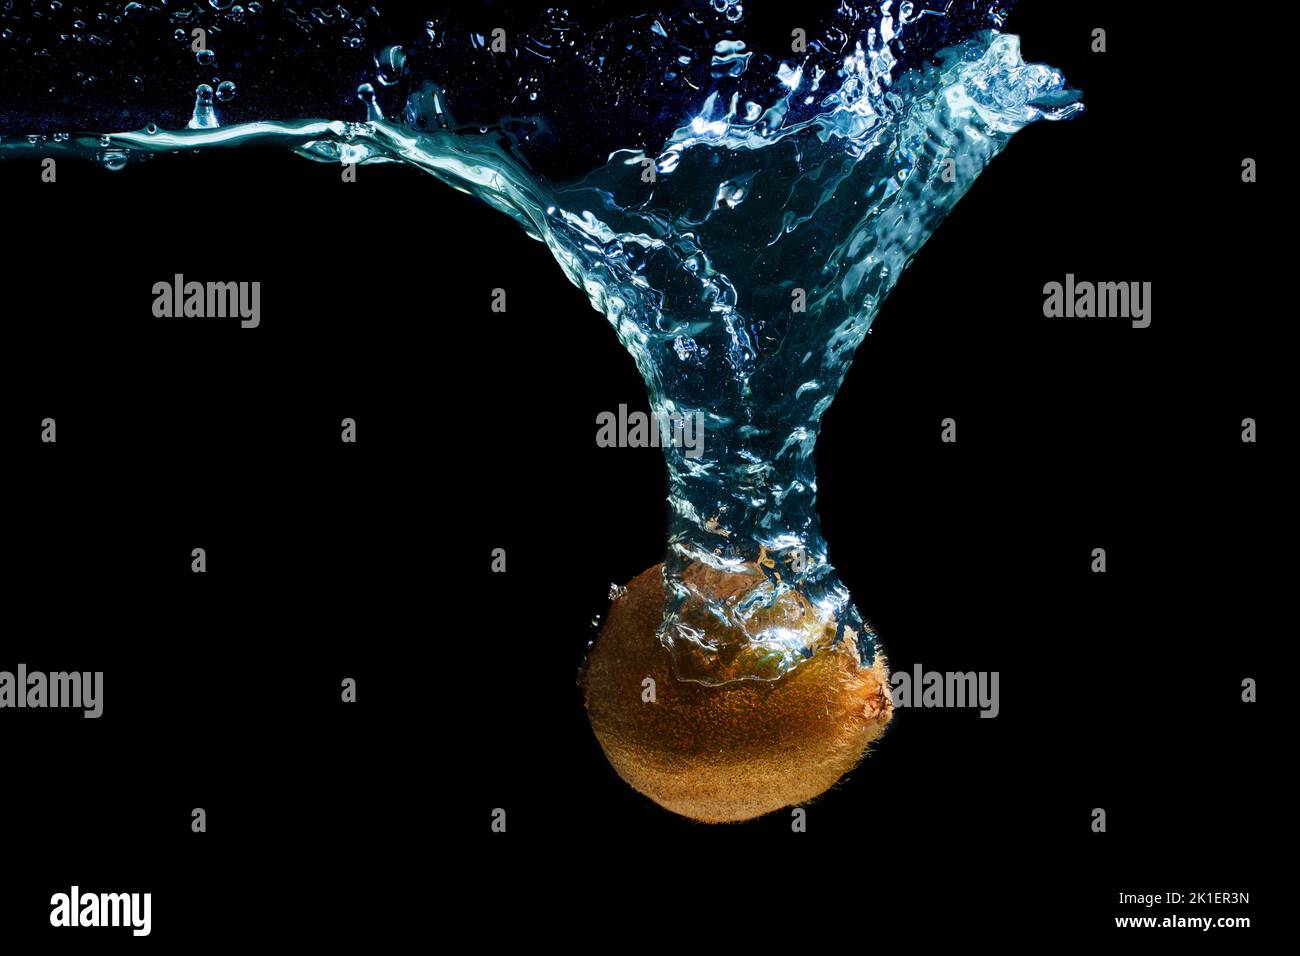 Whole kiwi dropped in water with a whirlpool isolated on black background Stock Photo